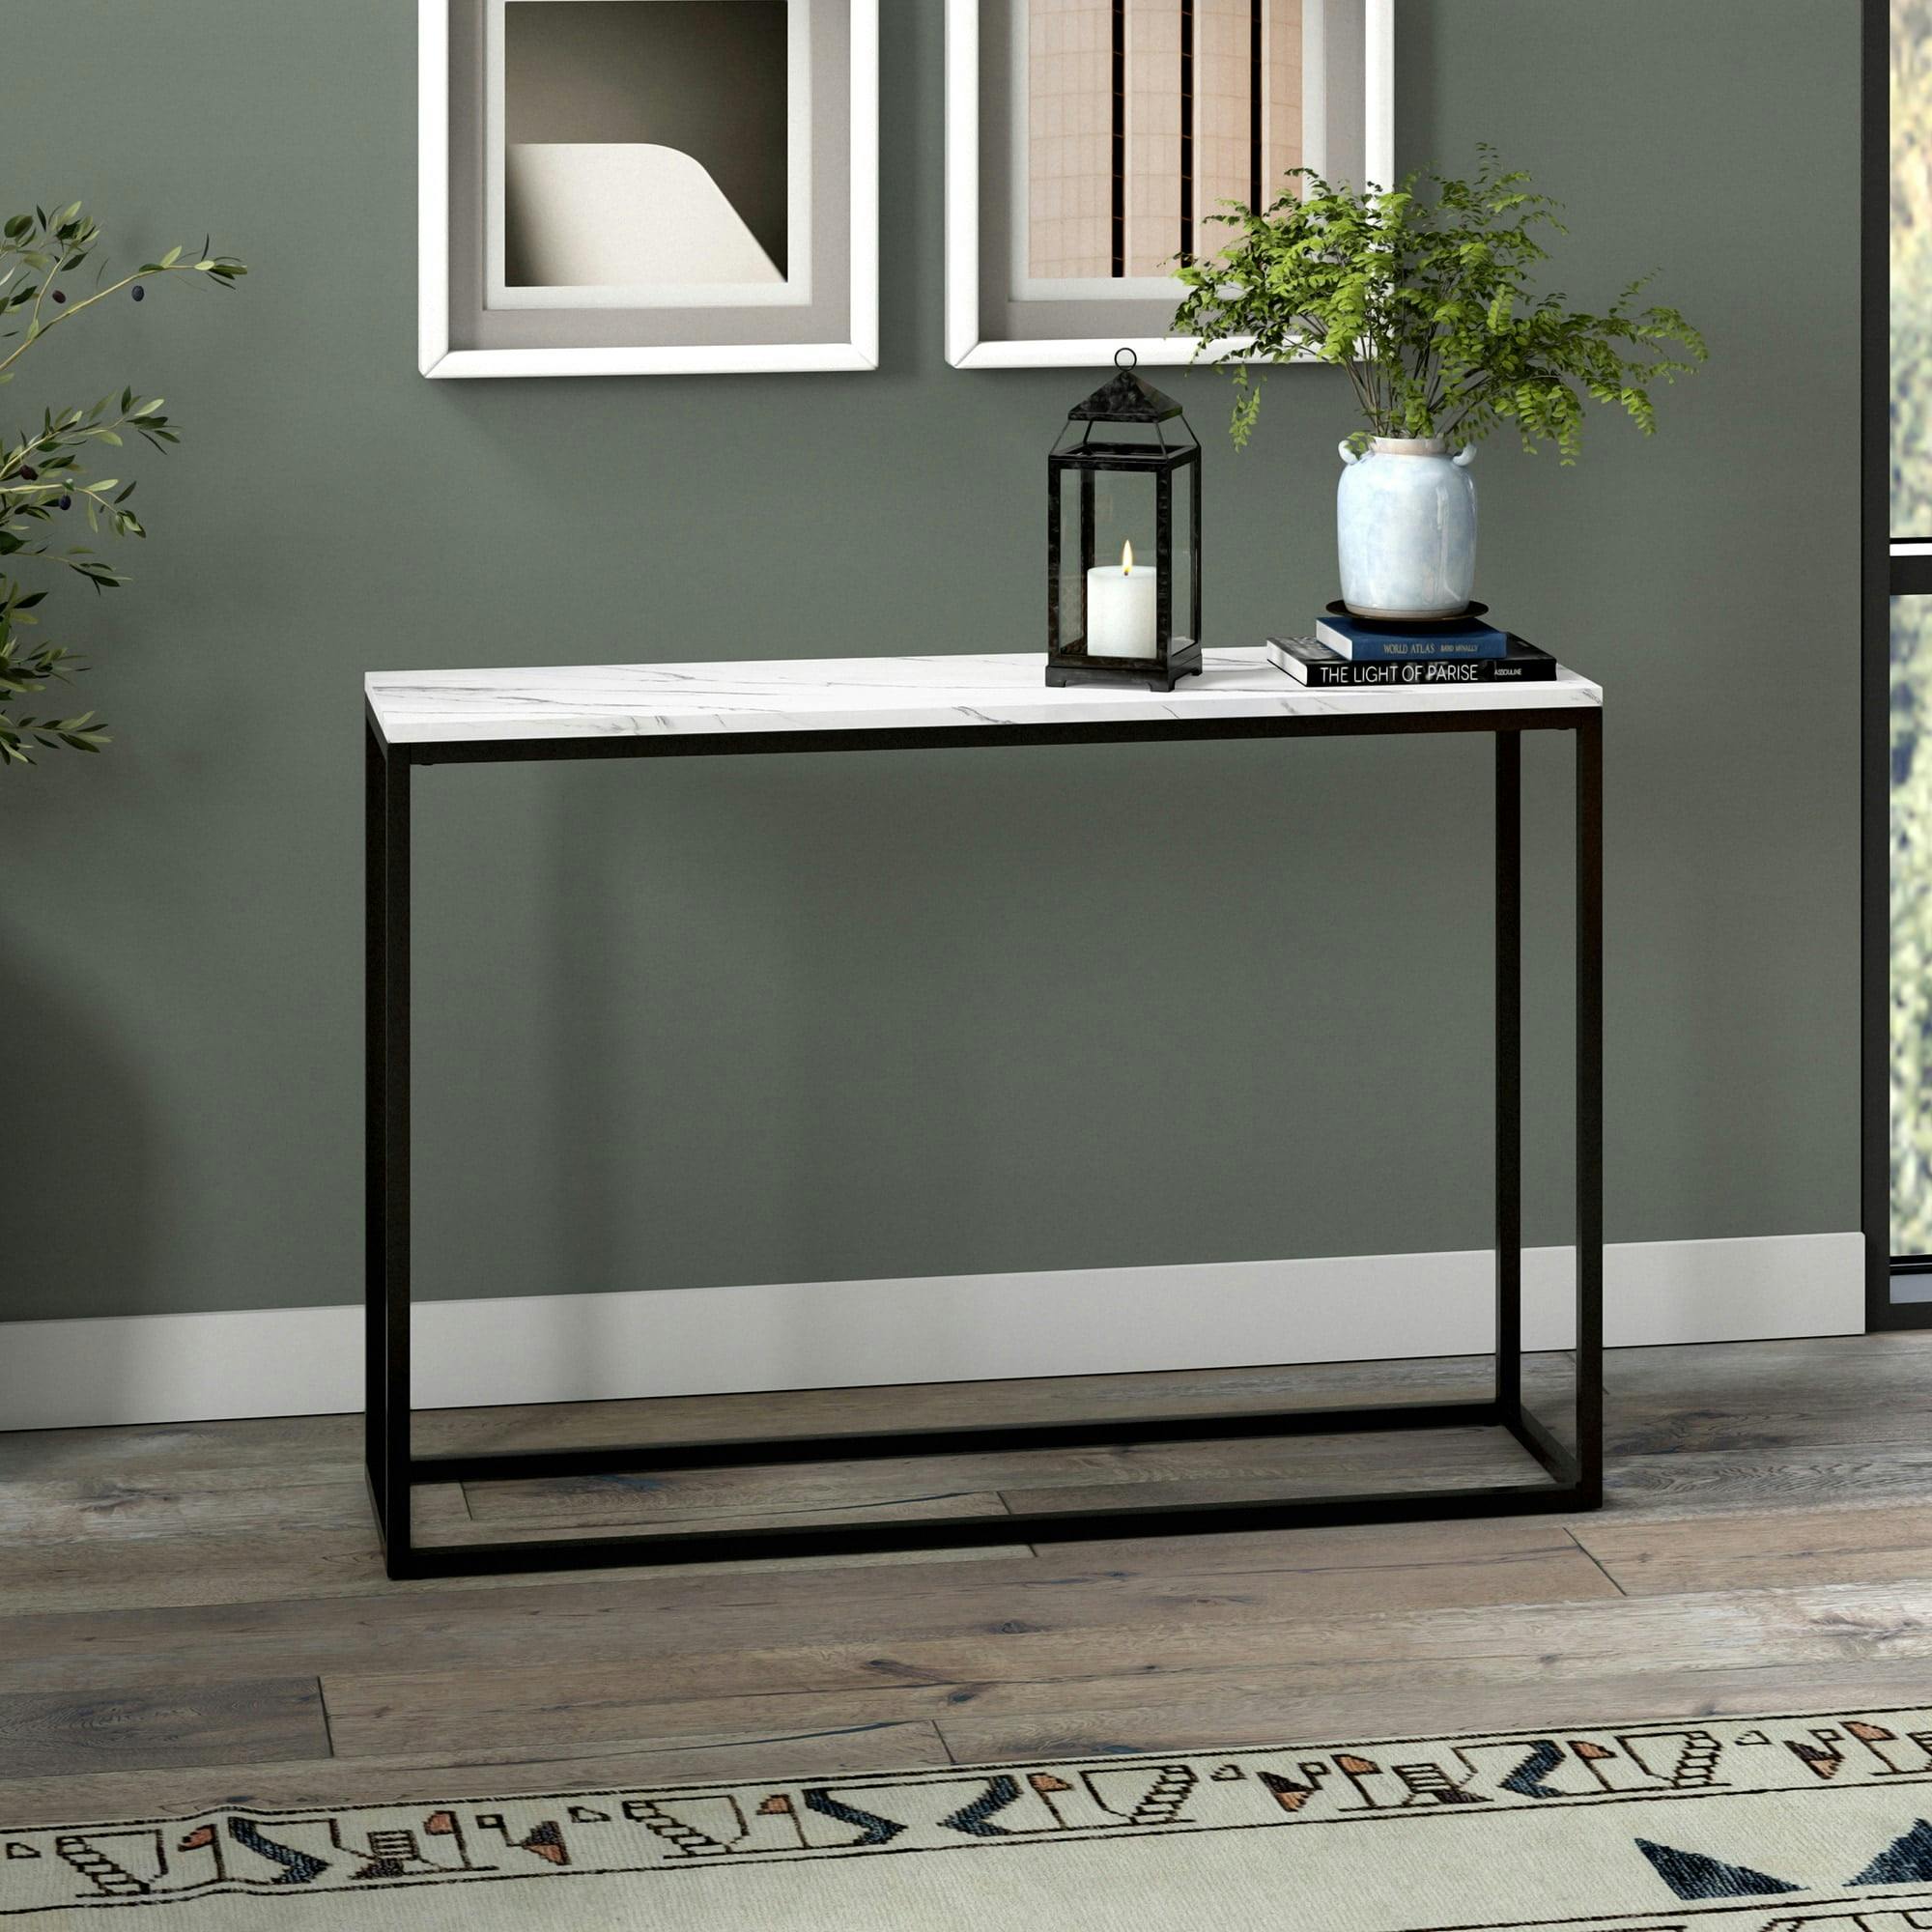 Dalbec 44" Blackened Bronze Console Table with Faux Marble Top